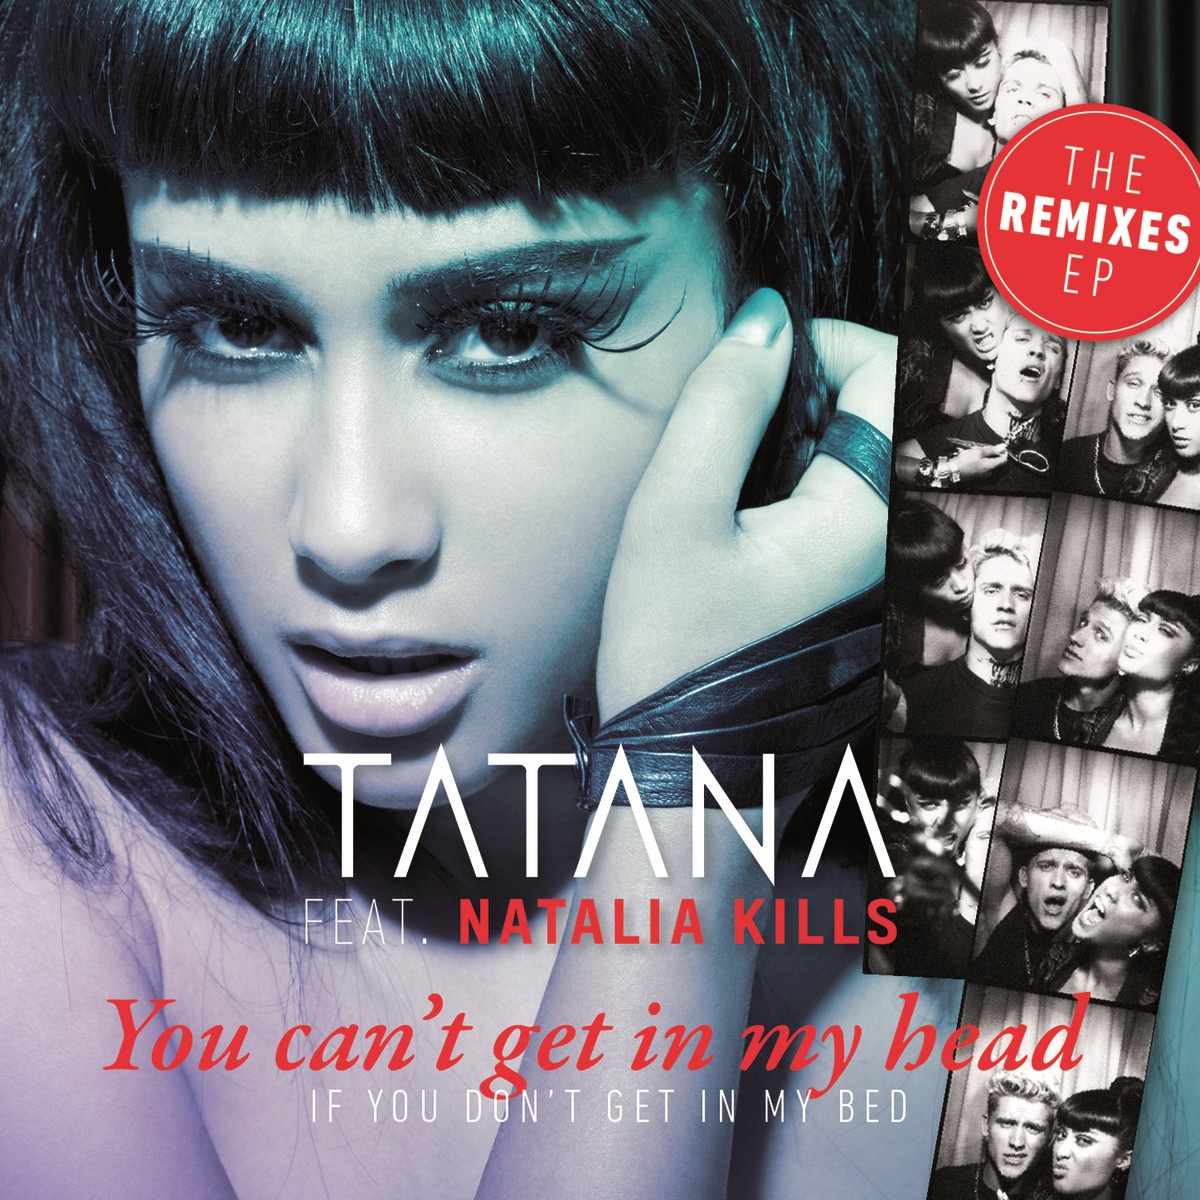 You Can't Get in My Head (If You Don't Get in My Bed) [feat. Natalia Kills] [The Structure Remix]